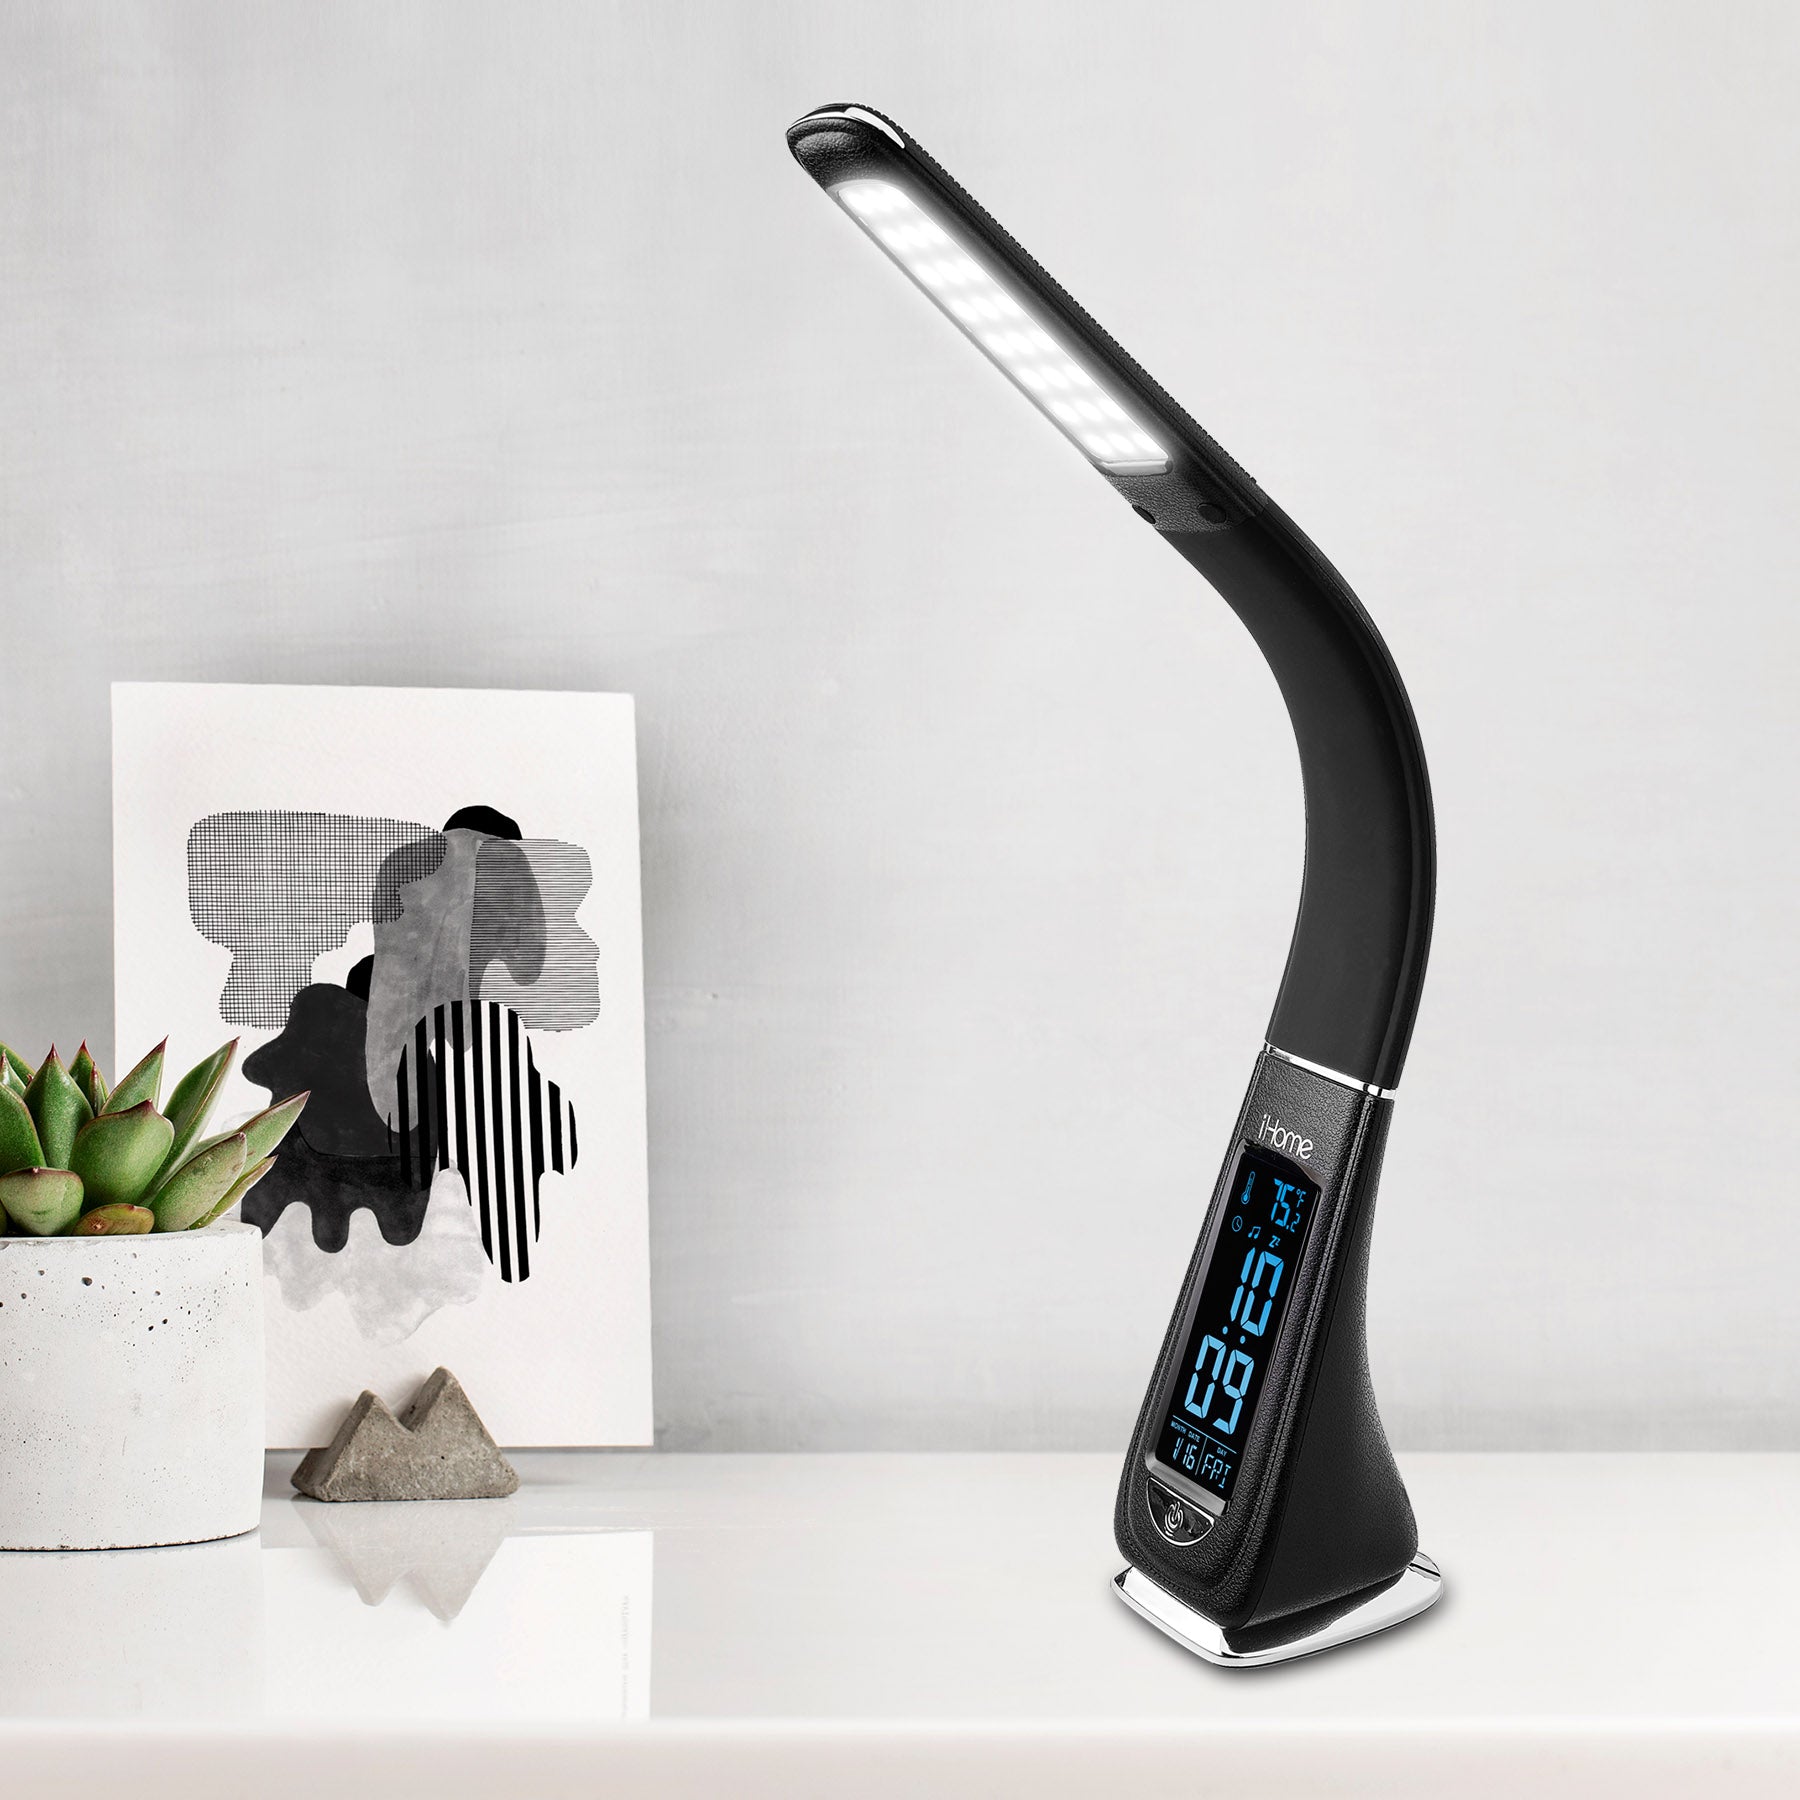 Desk Lamp for Bedroom, Reading Light with Alarm Clock and USB Charging (IL100B) - Black